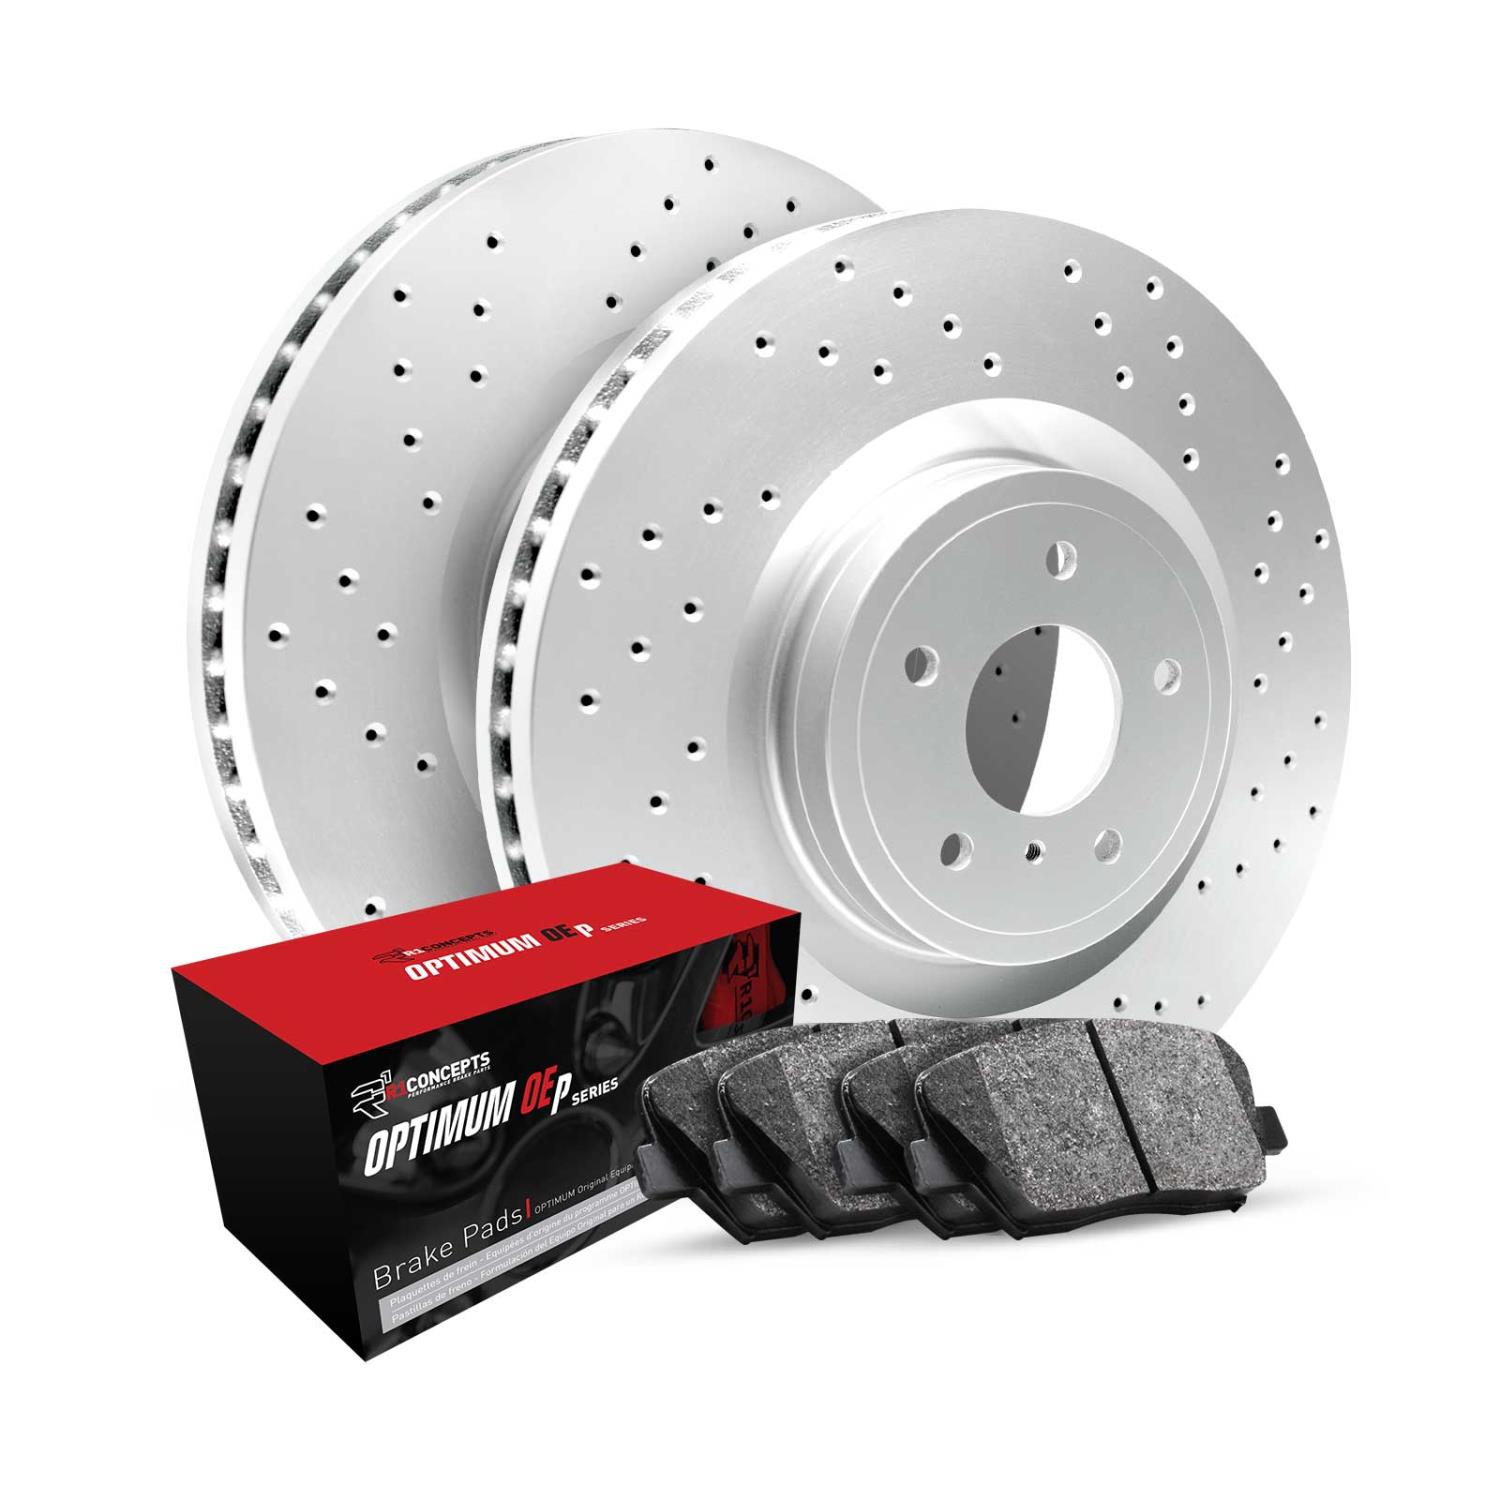 GEO-Carbon Drilled Brake Rotor Set w/Optimum OE Pads, 2008-2018 Fits Multiple Makes/Models, Position: Rear